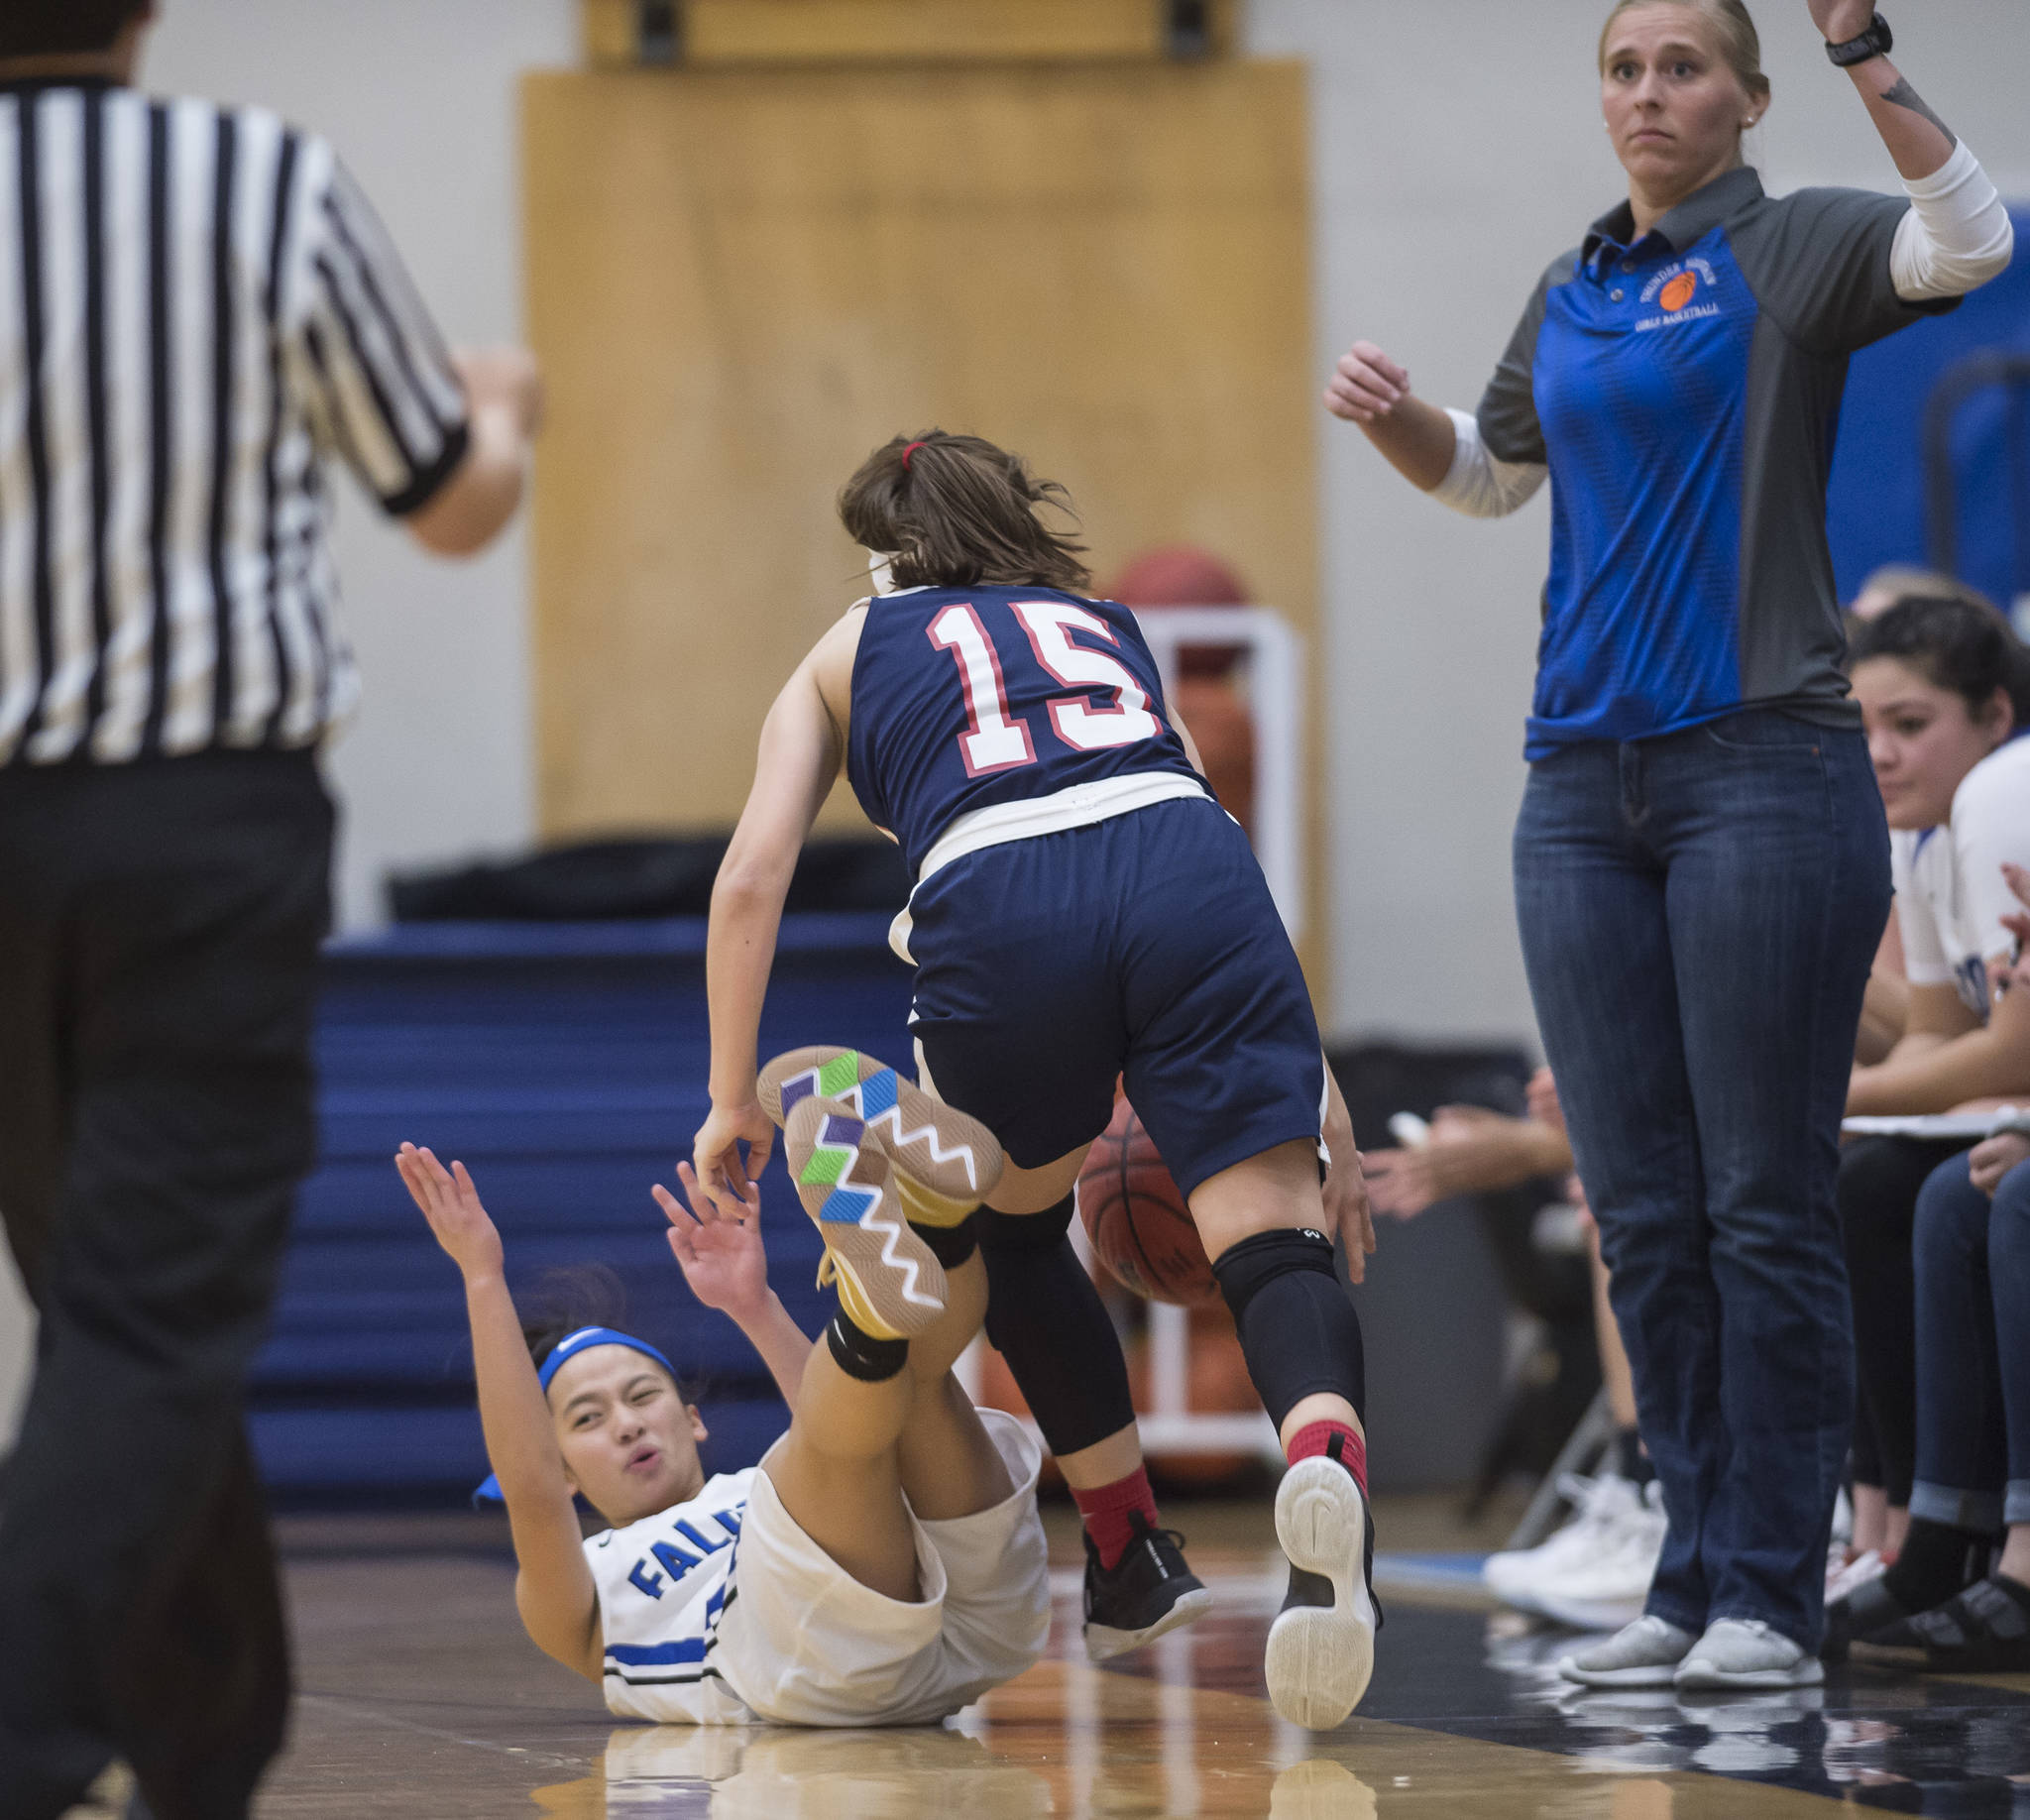 Thunder Mountain’s Mary Neal Garcia falls and is called for a foul against North Pole’s Laura Donovan at TMHS on Thursday, Dec. 13, 2018. (Michael Penn | Juneau Empire)